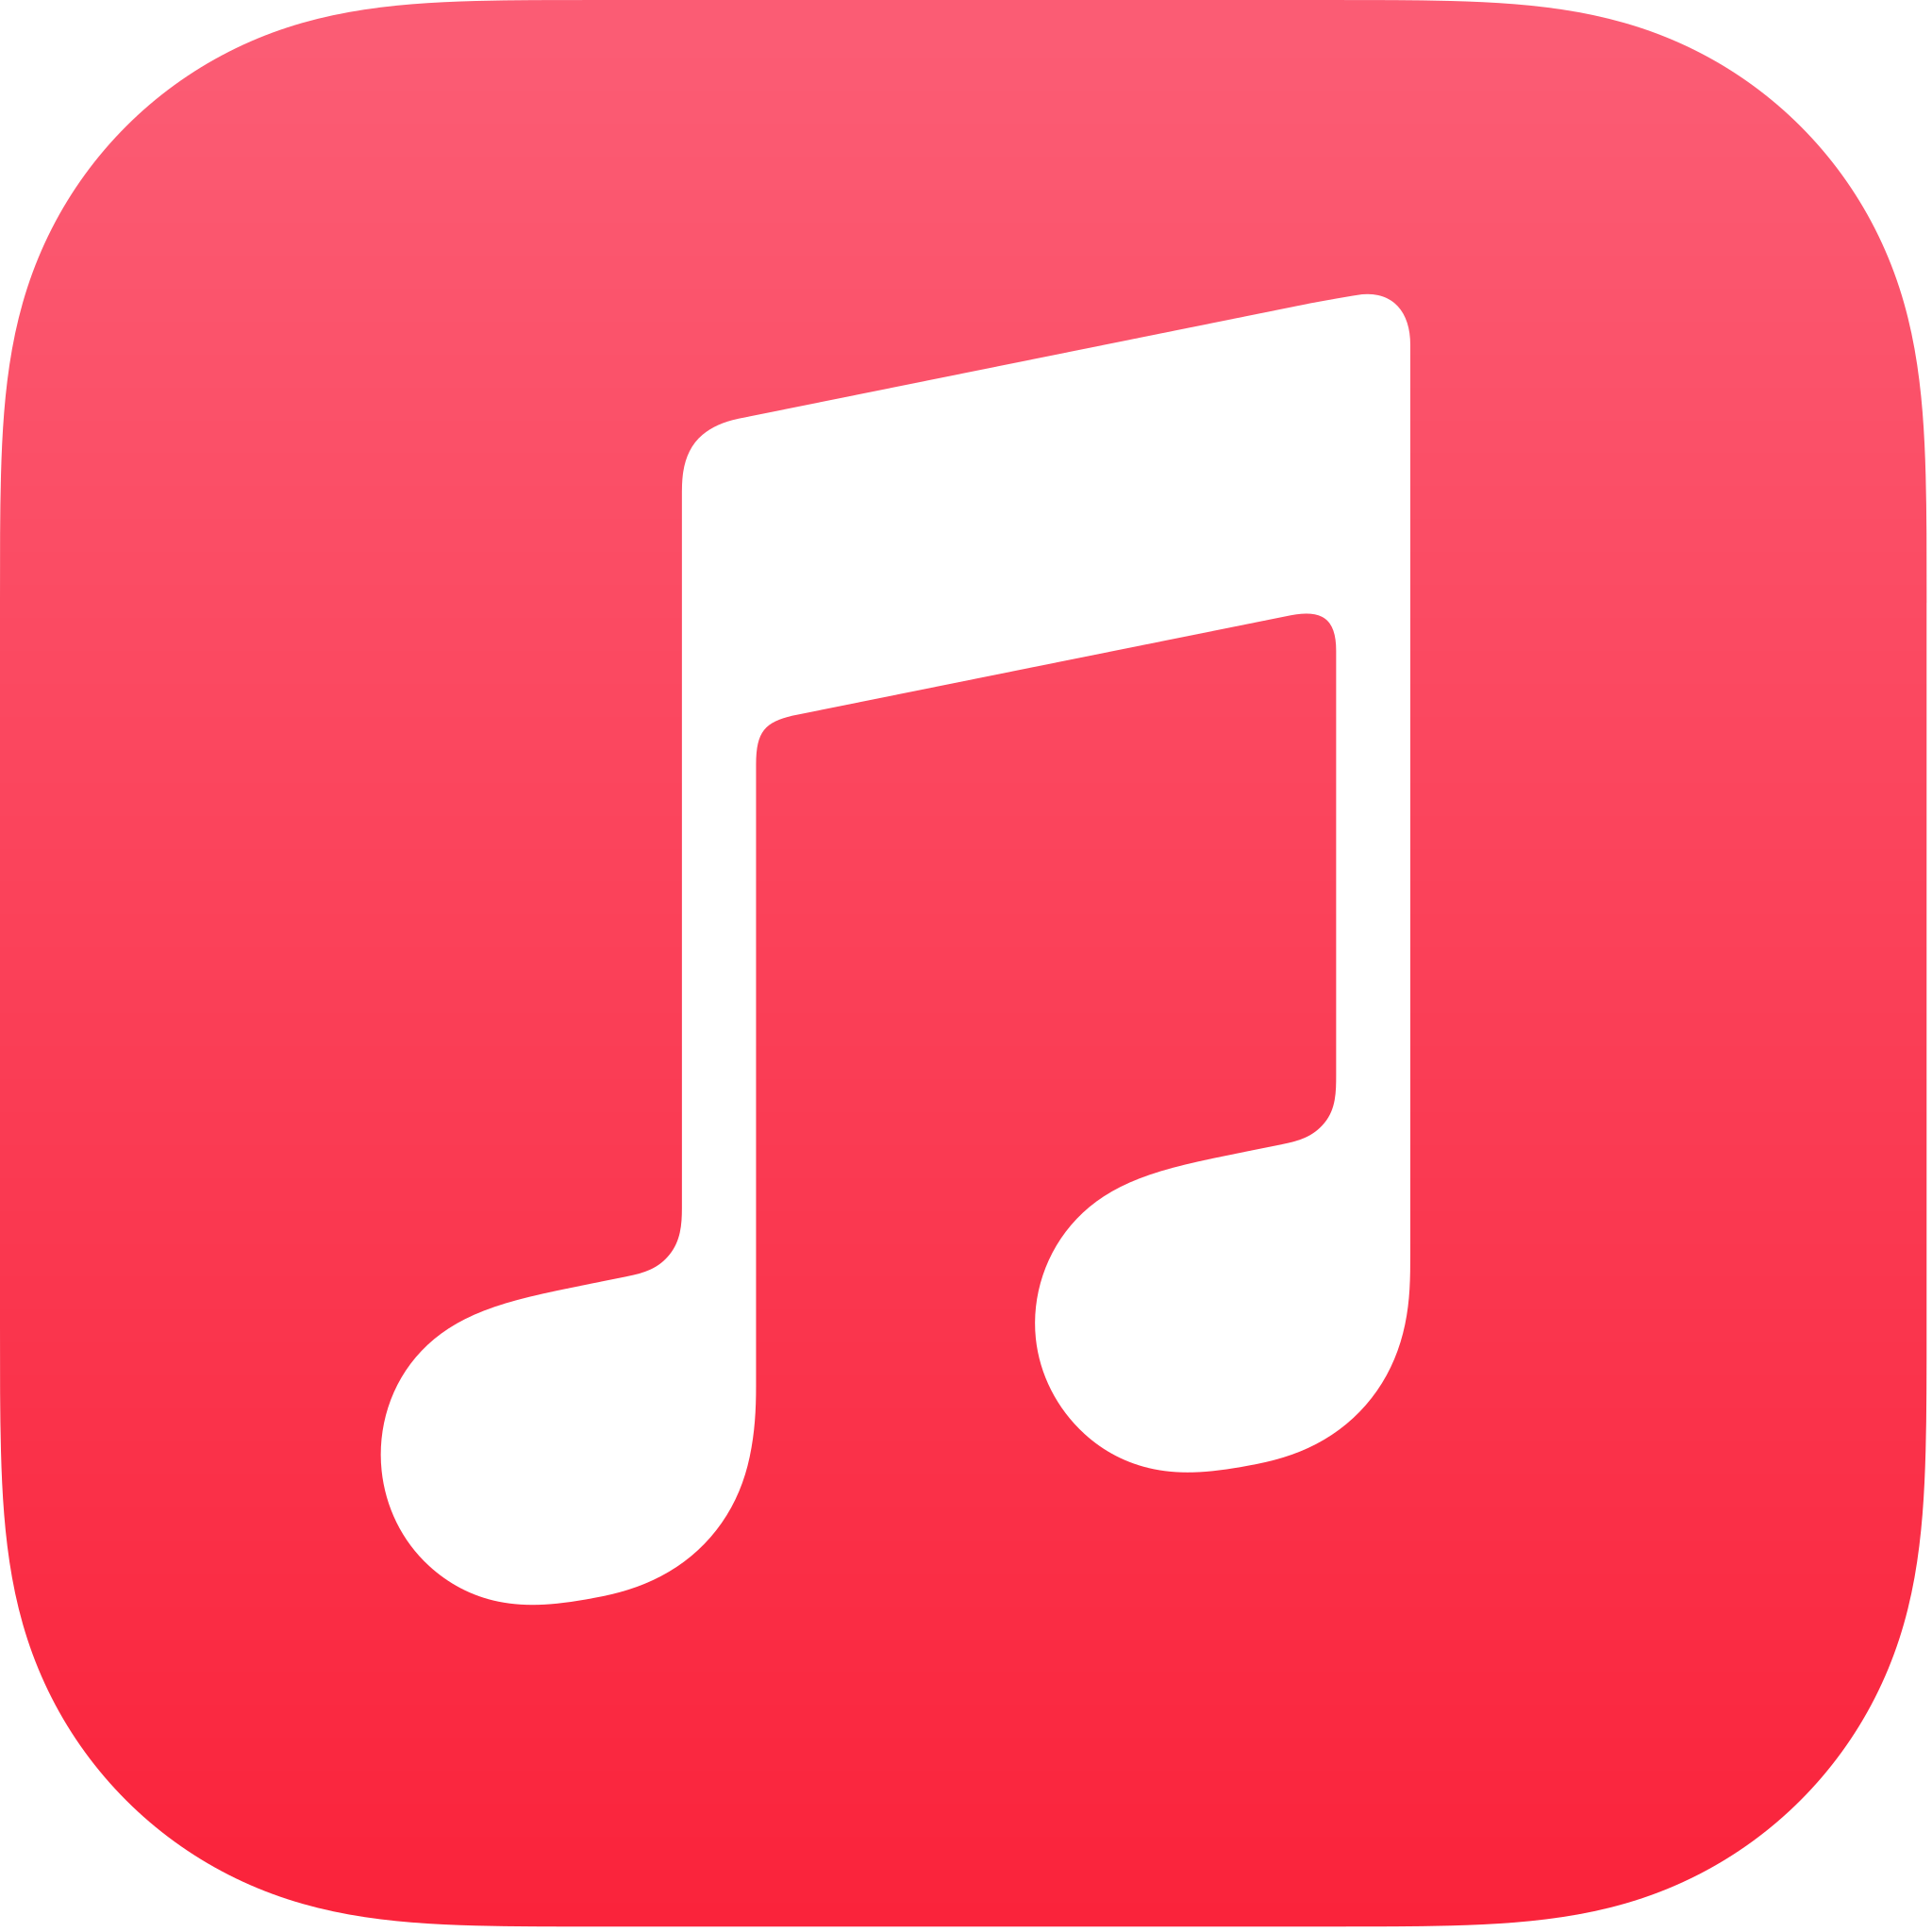 File:Apple Music icon.svg - Wikimedia Commons